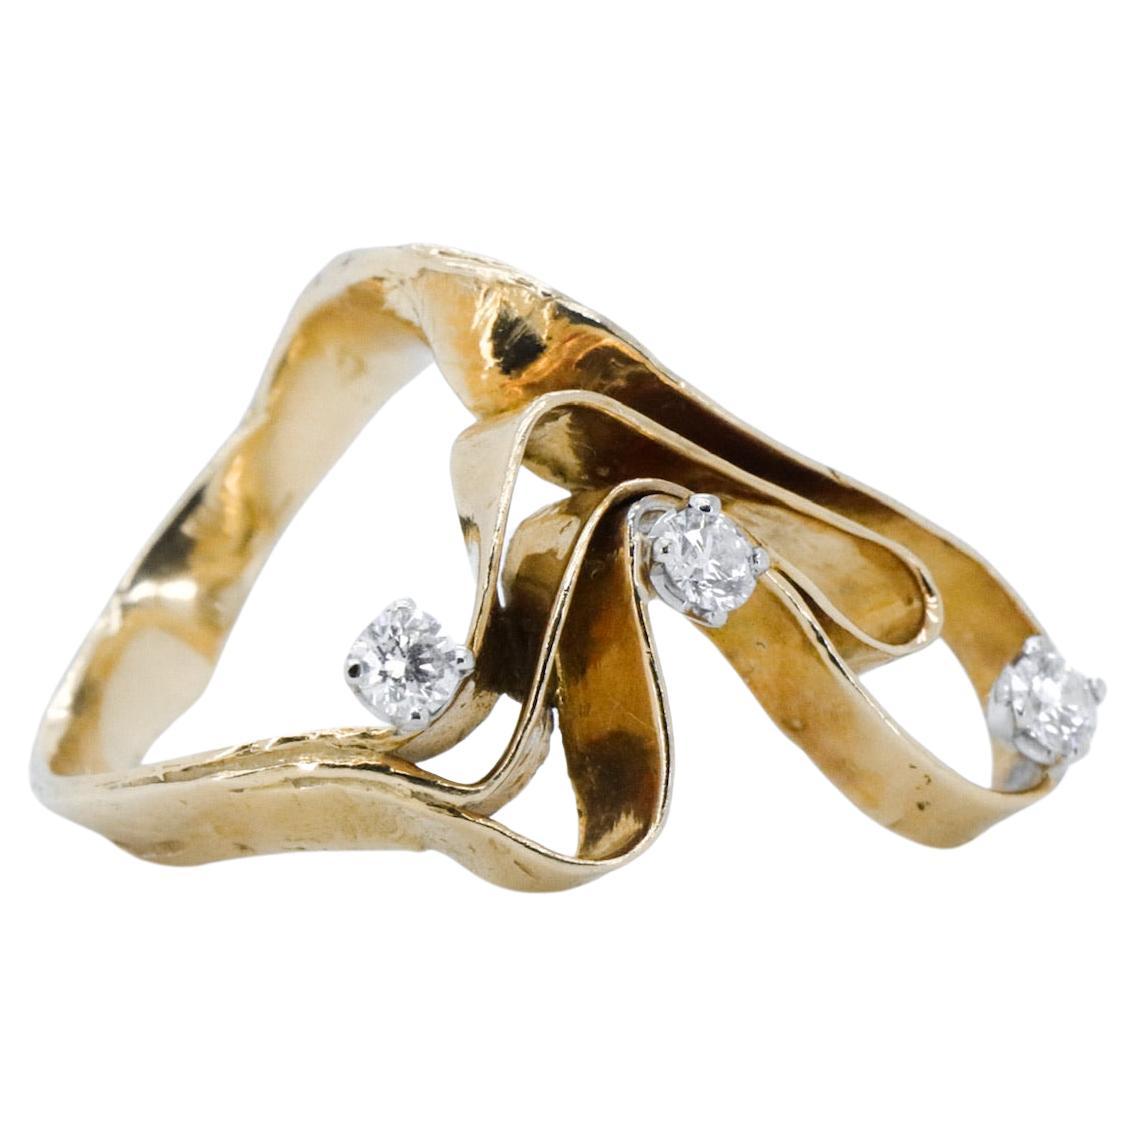 18K Yellow Gold Made in Italy Diamond Grounding Empowerment Three Stones Ring.
Unlock Your Divine Potential with the Sirio ring. 
Gems and metal are energetically cleansed to emit their best vibrations.
The Sirio ring is made of 18kt yellow gold and